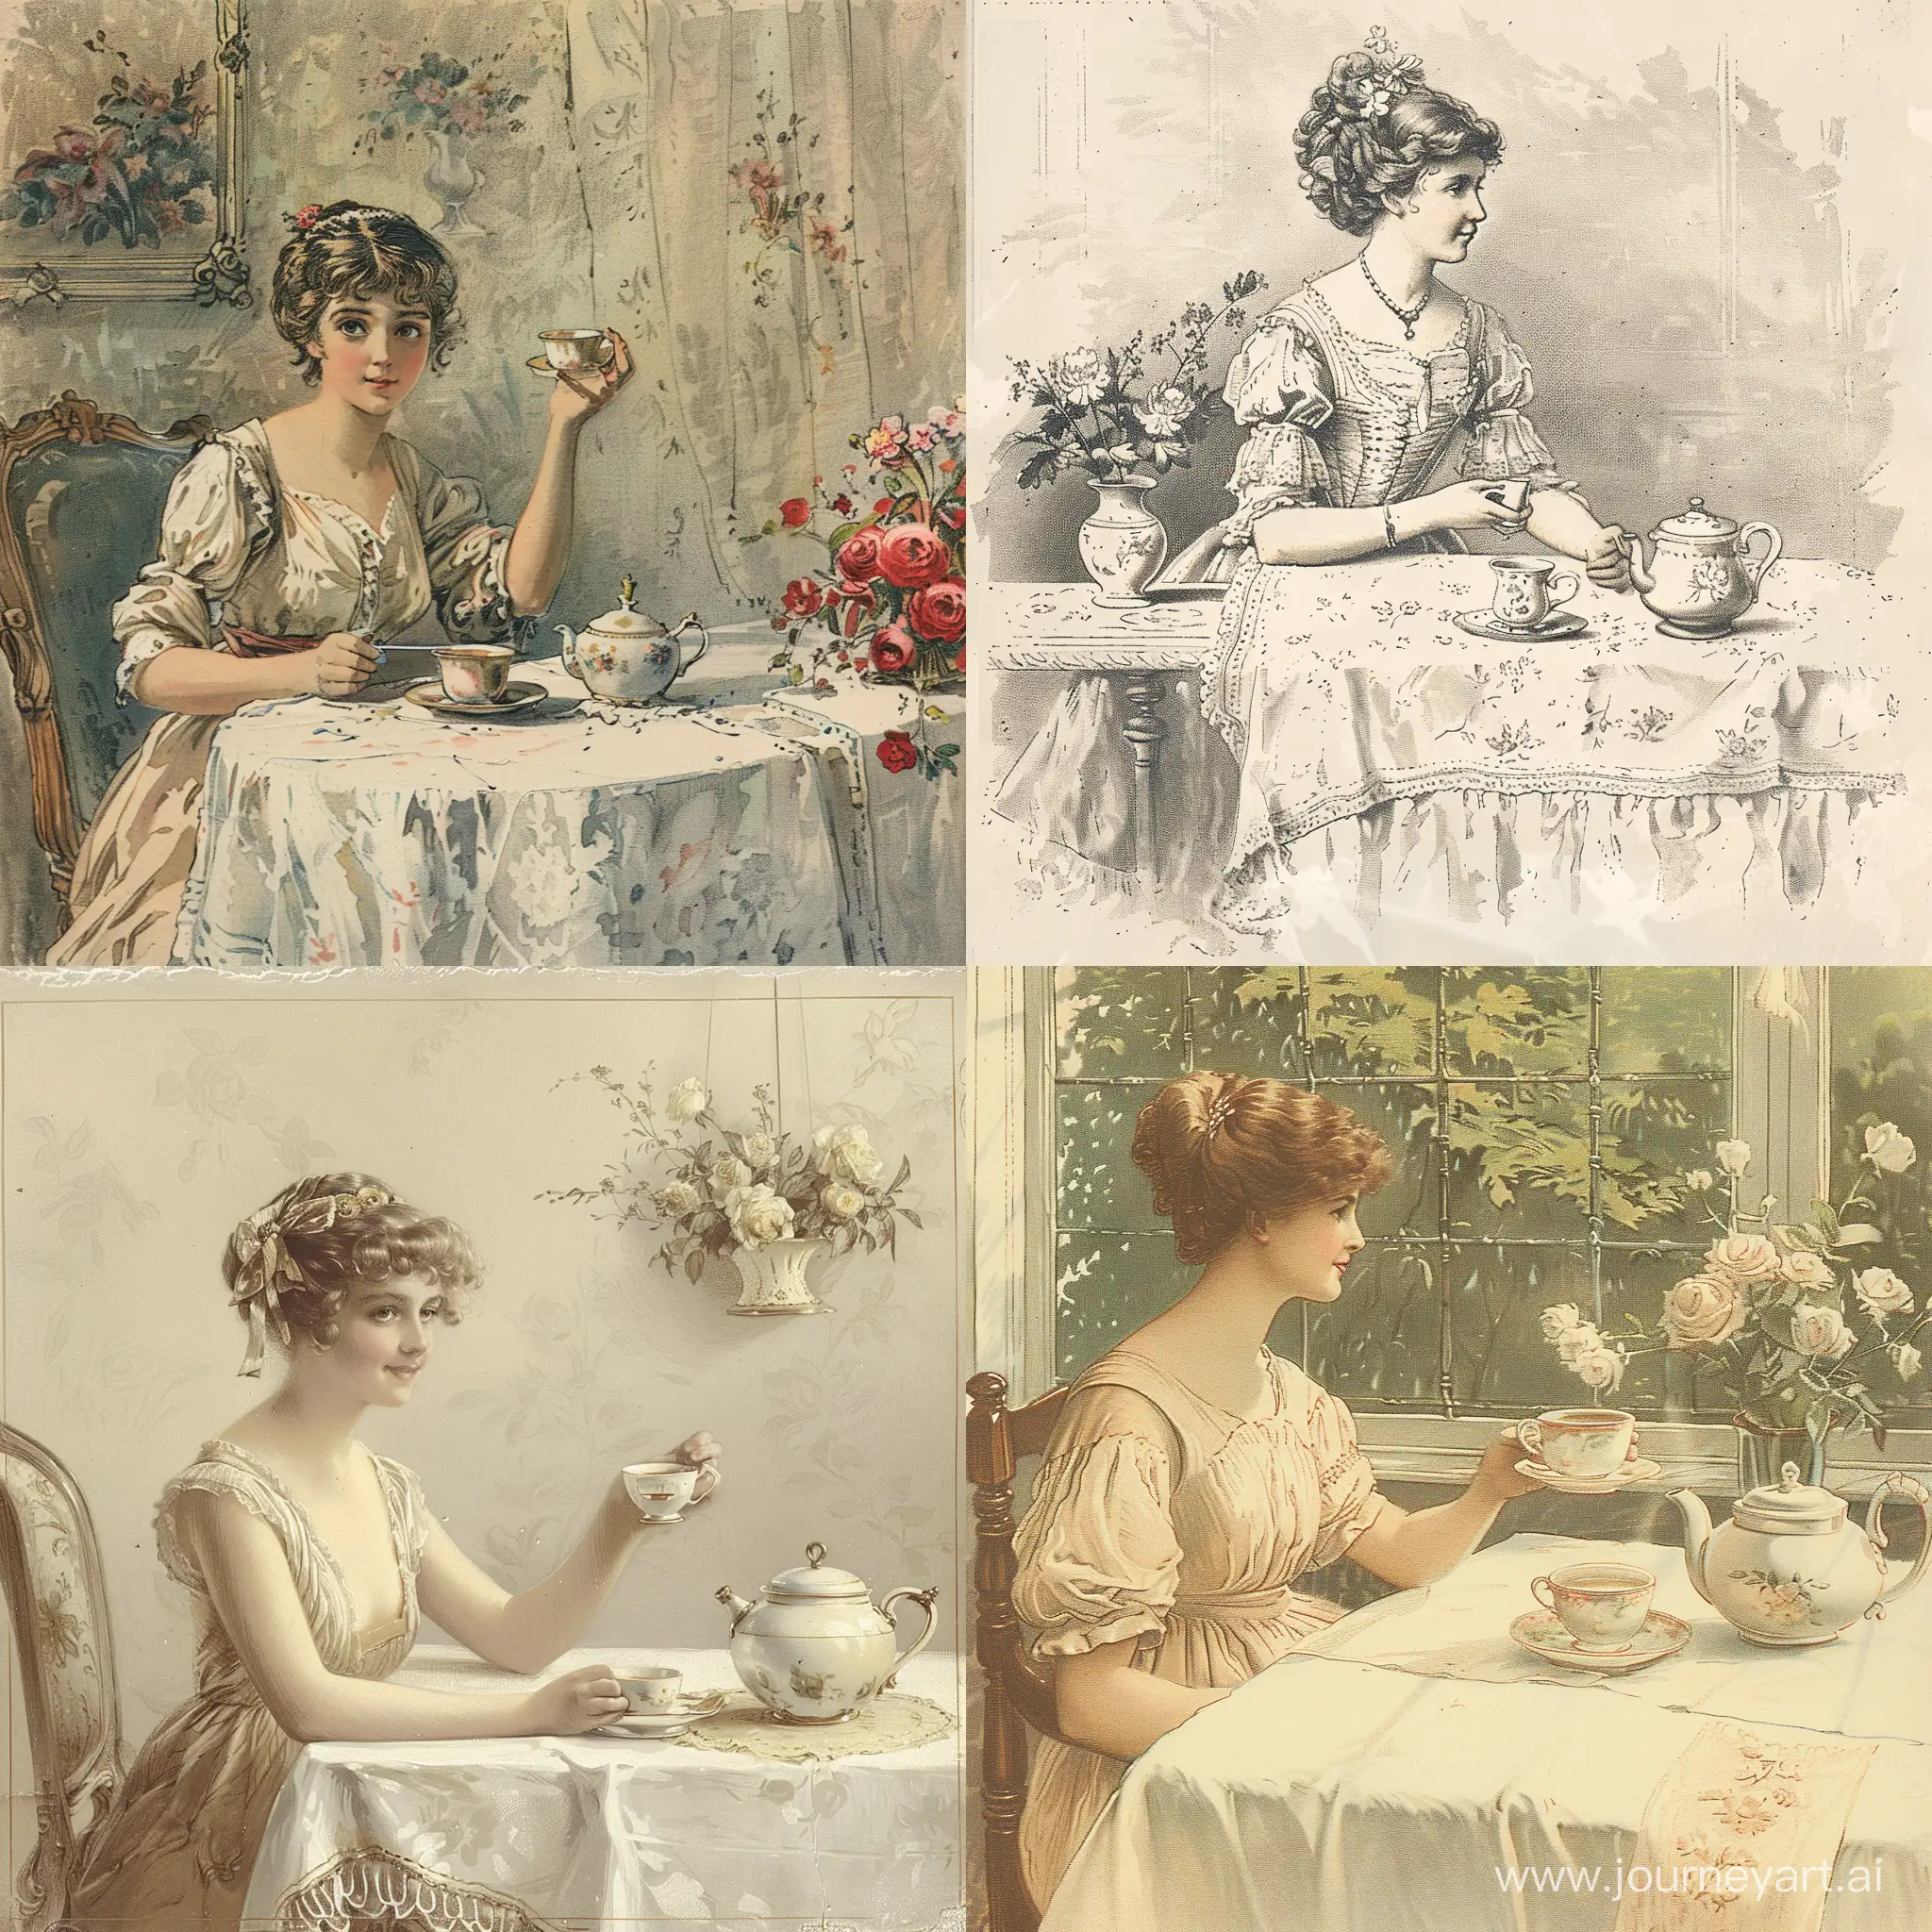 Draw art Vintage postcard Scene of the XIX century, light academia core, at the table sits a woman in a simple dress and holds a cup of tea., On the table white tablecloth, porcelain teapot, flowers.